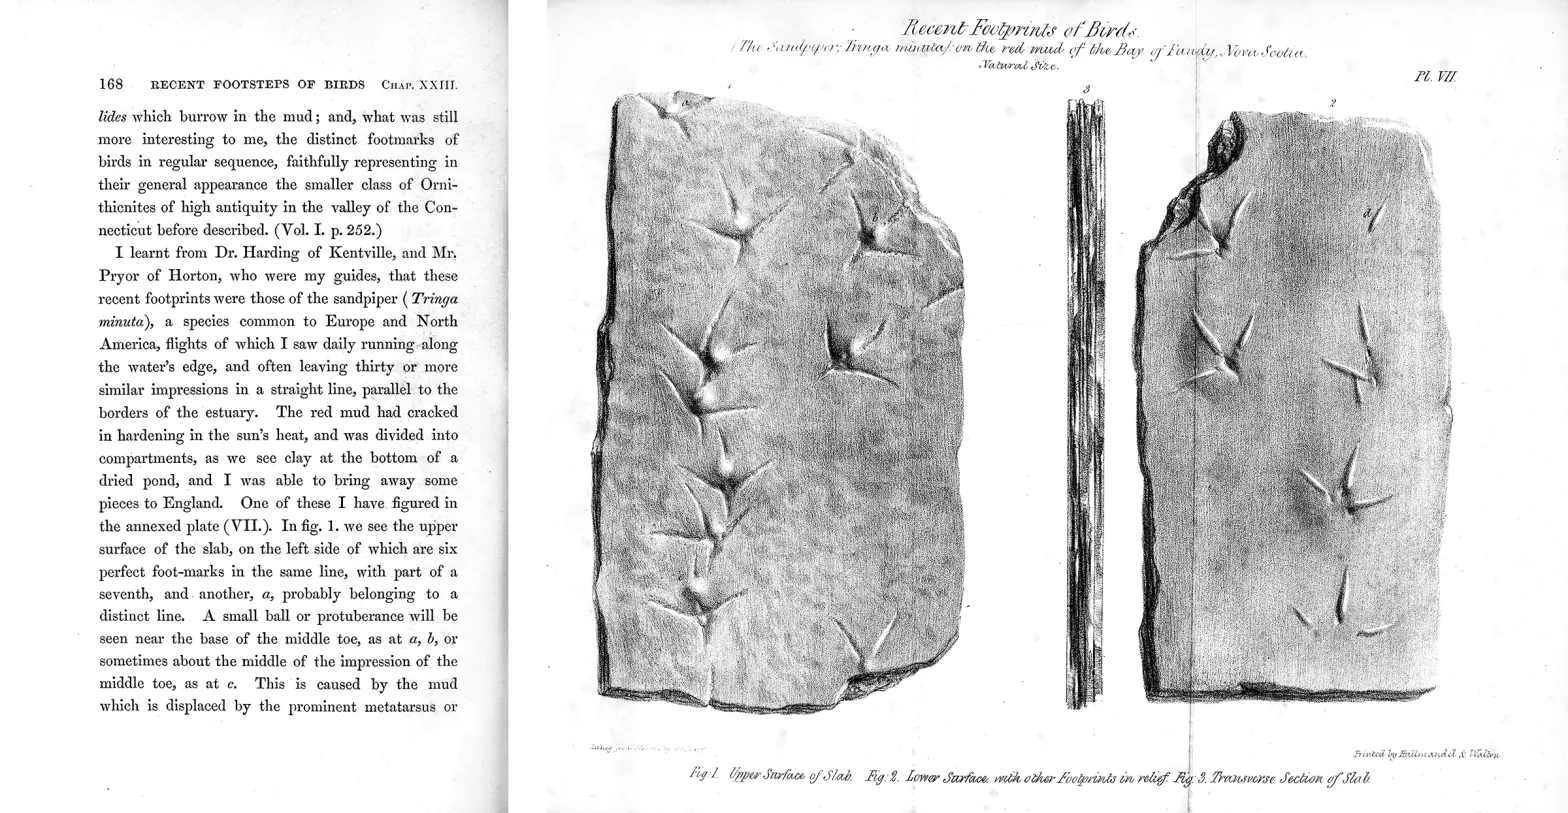 Page of text from the book Travels in North America and a fold out lithograph of the top and bottom of a piece of dried mud with bird footprints